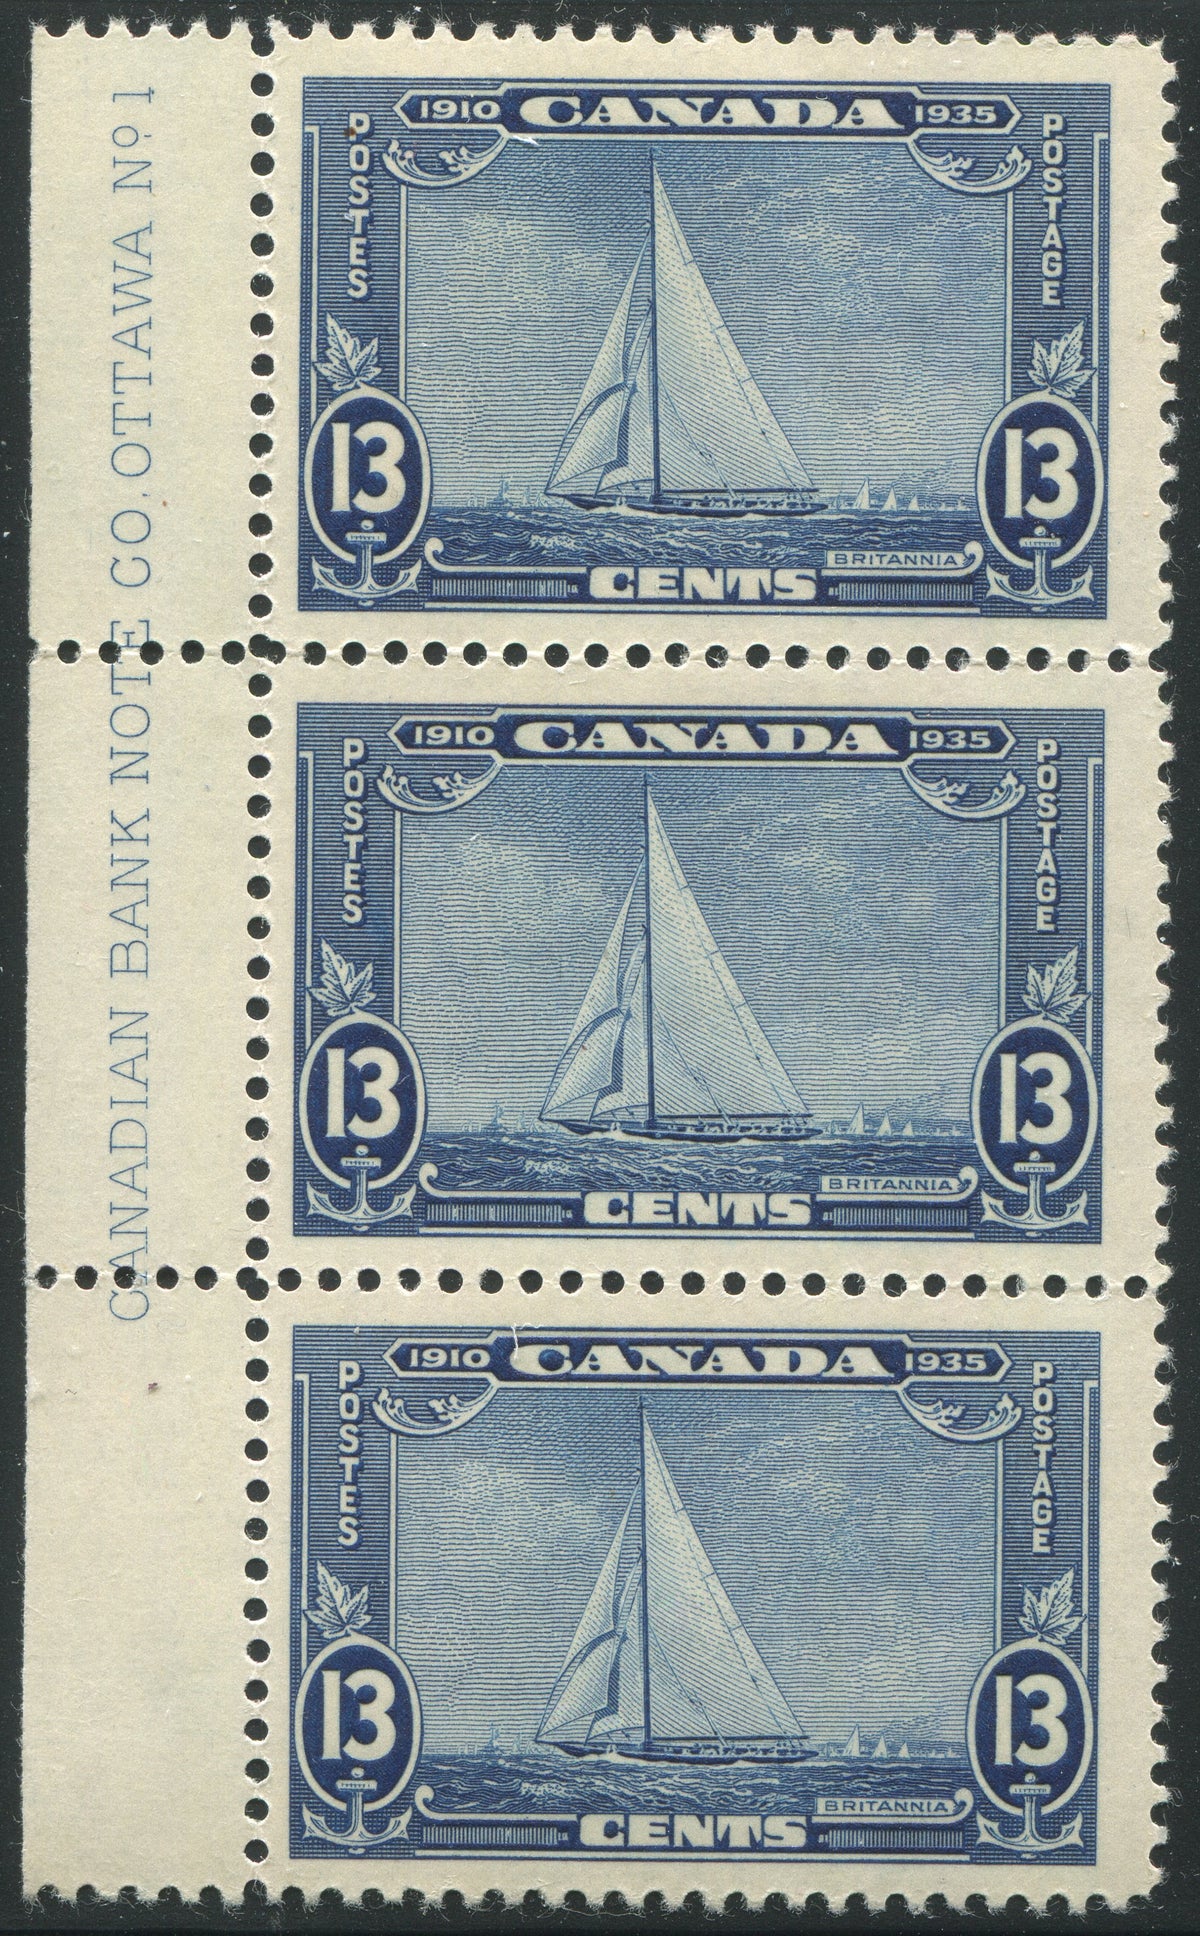 0216CA2005 - Canada #216 - Mint Plate Strip of 3, Unlisted Re-Entry